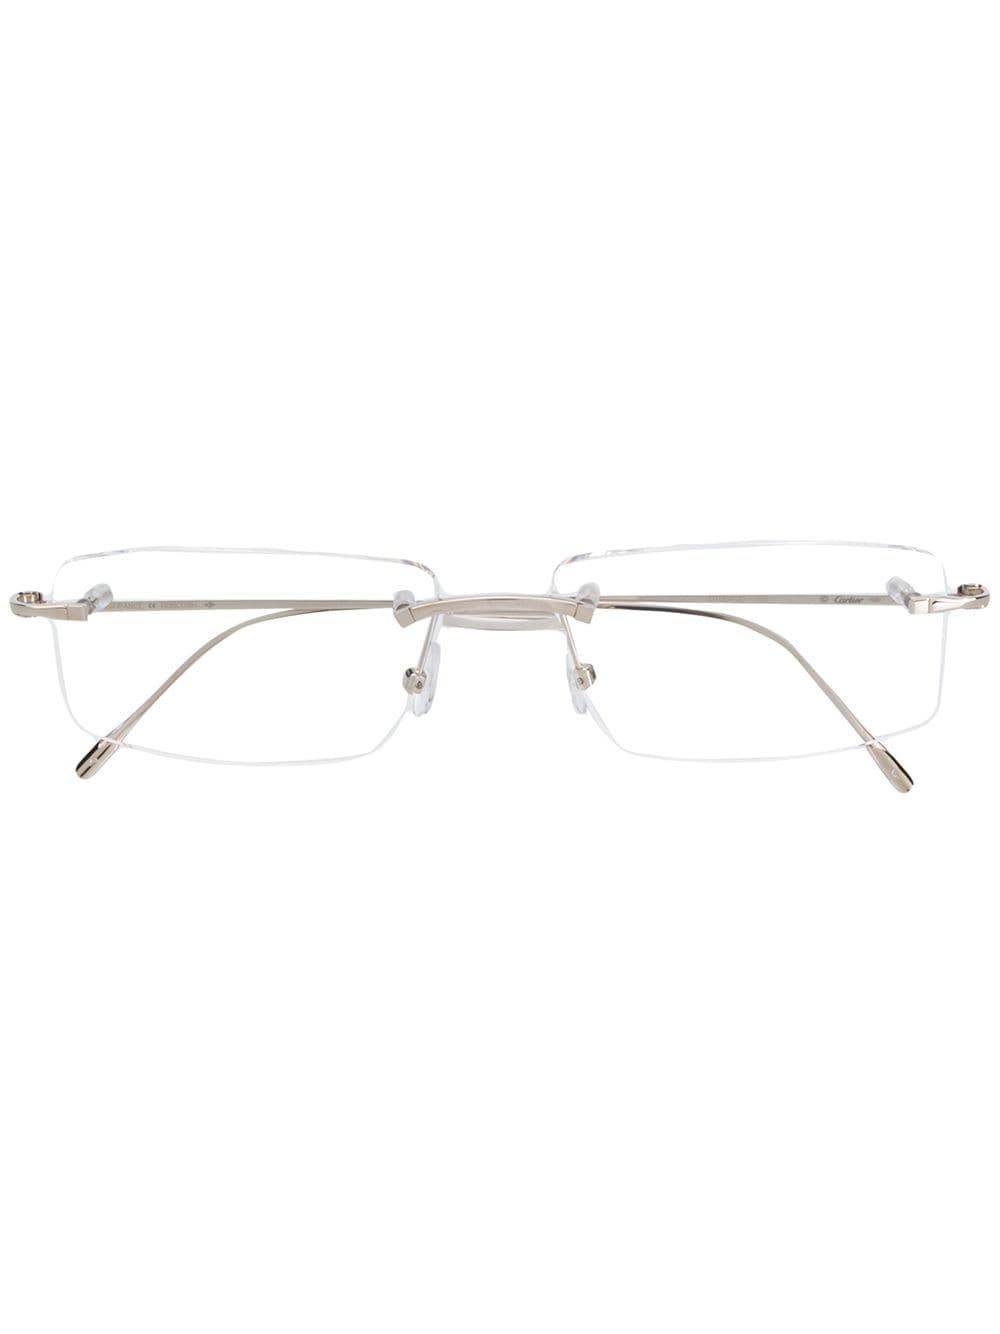 Shop Cartier Eyewear Louis Cartier glasses with Express Delivery - FARFETCH